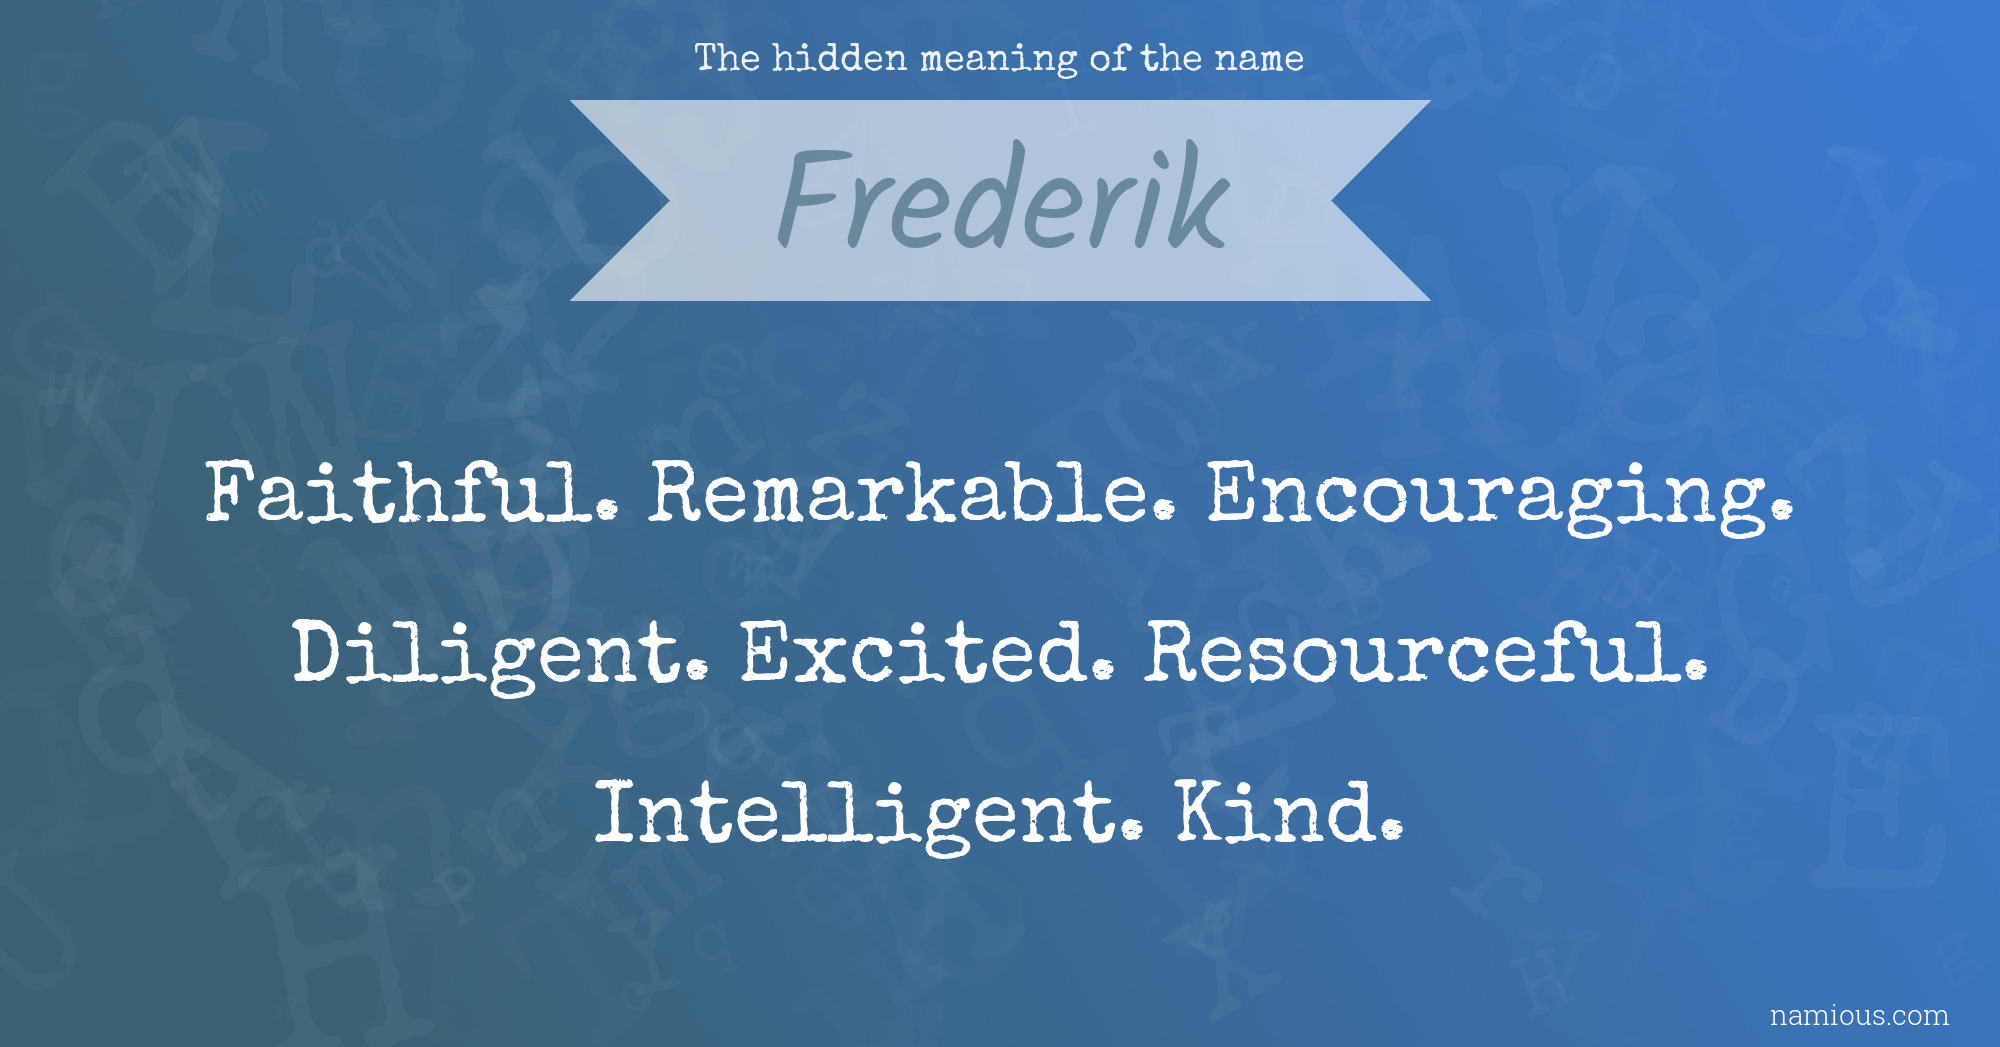 The hidden meaning of the name Frederik